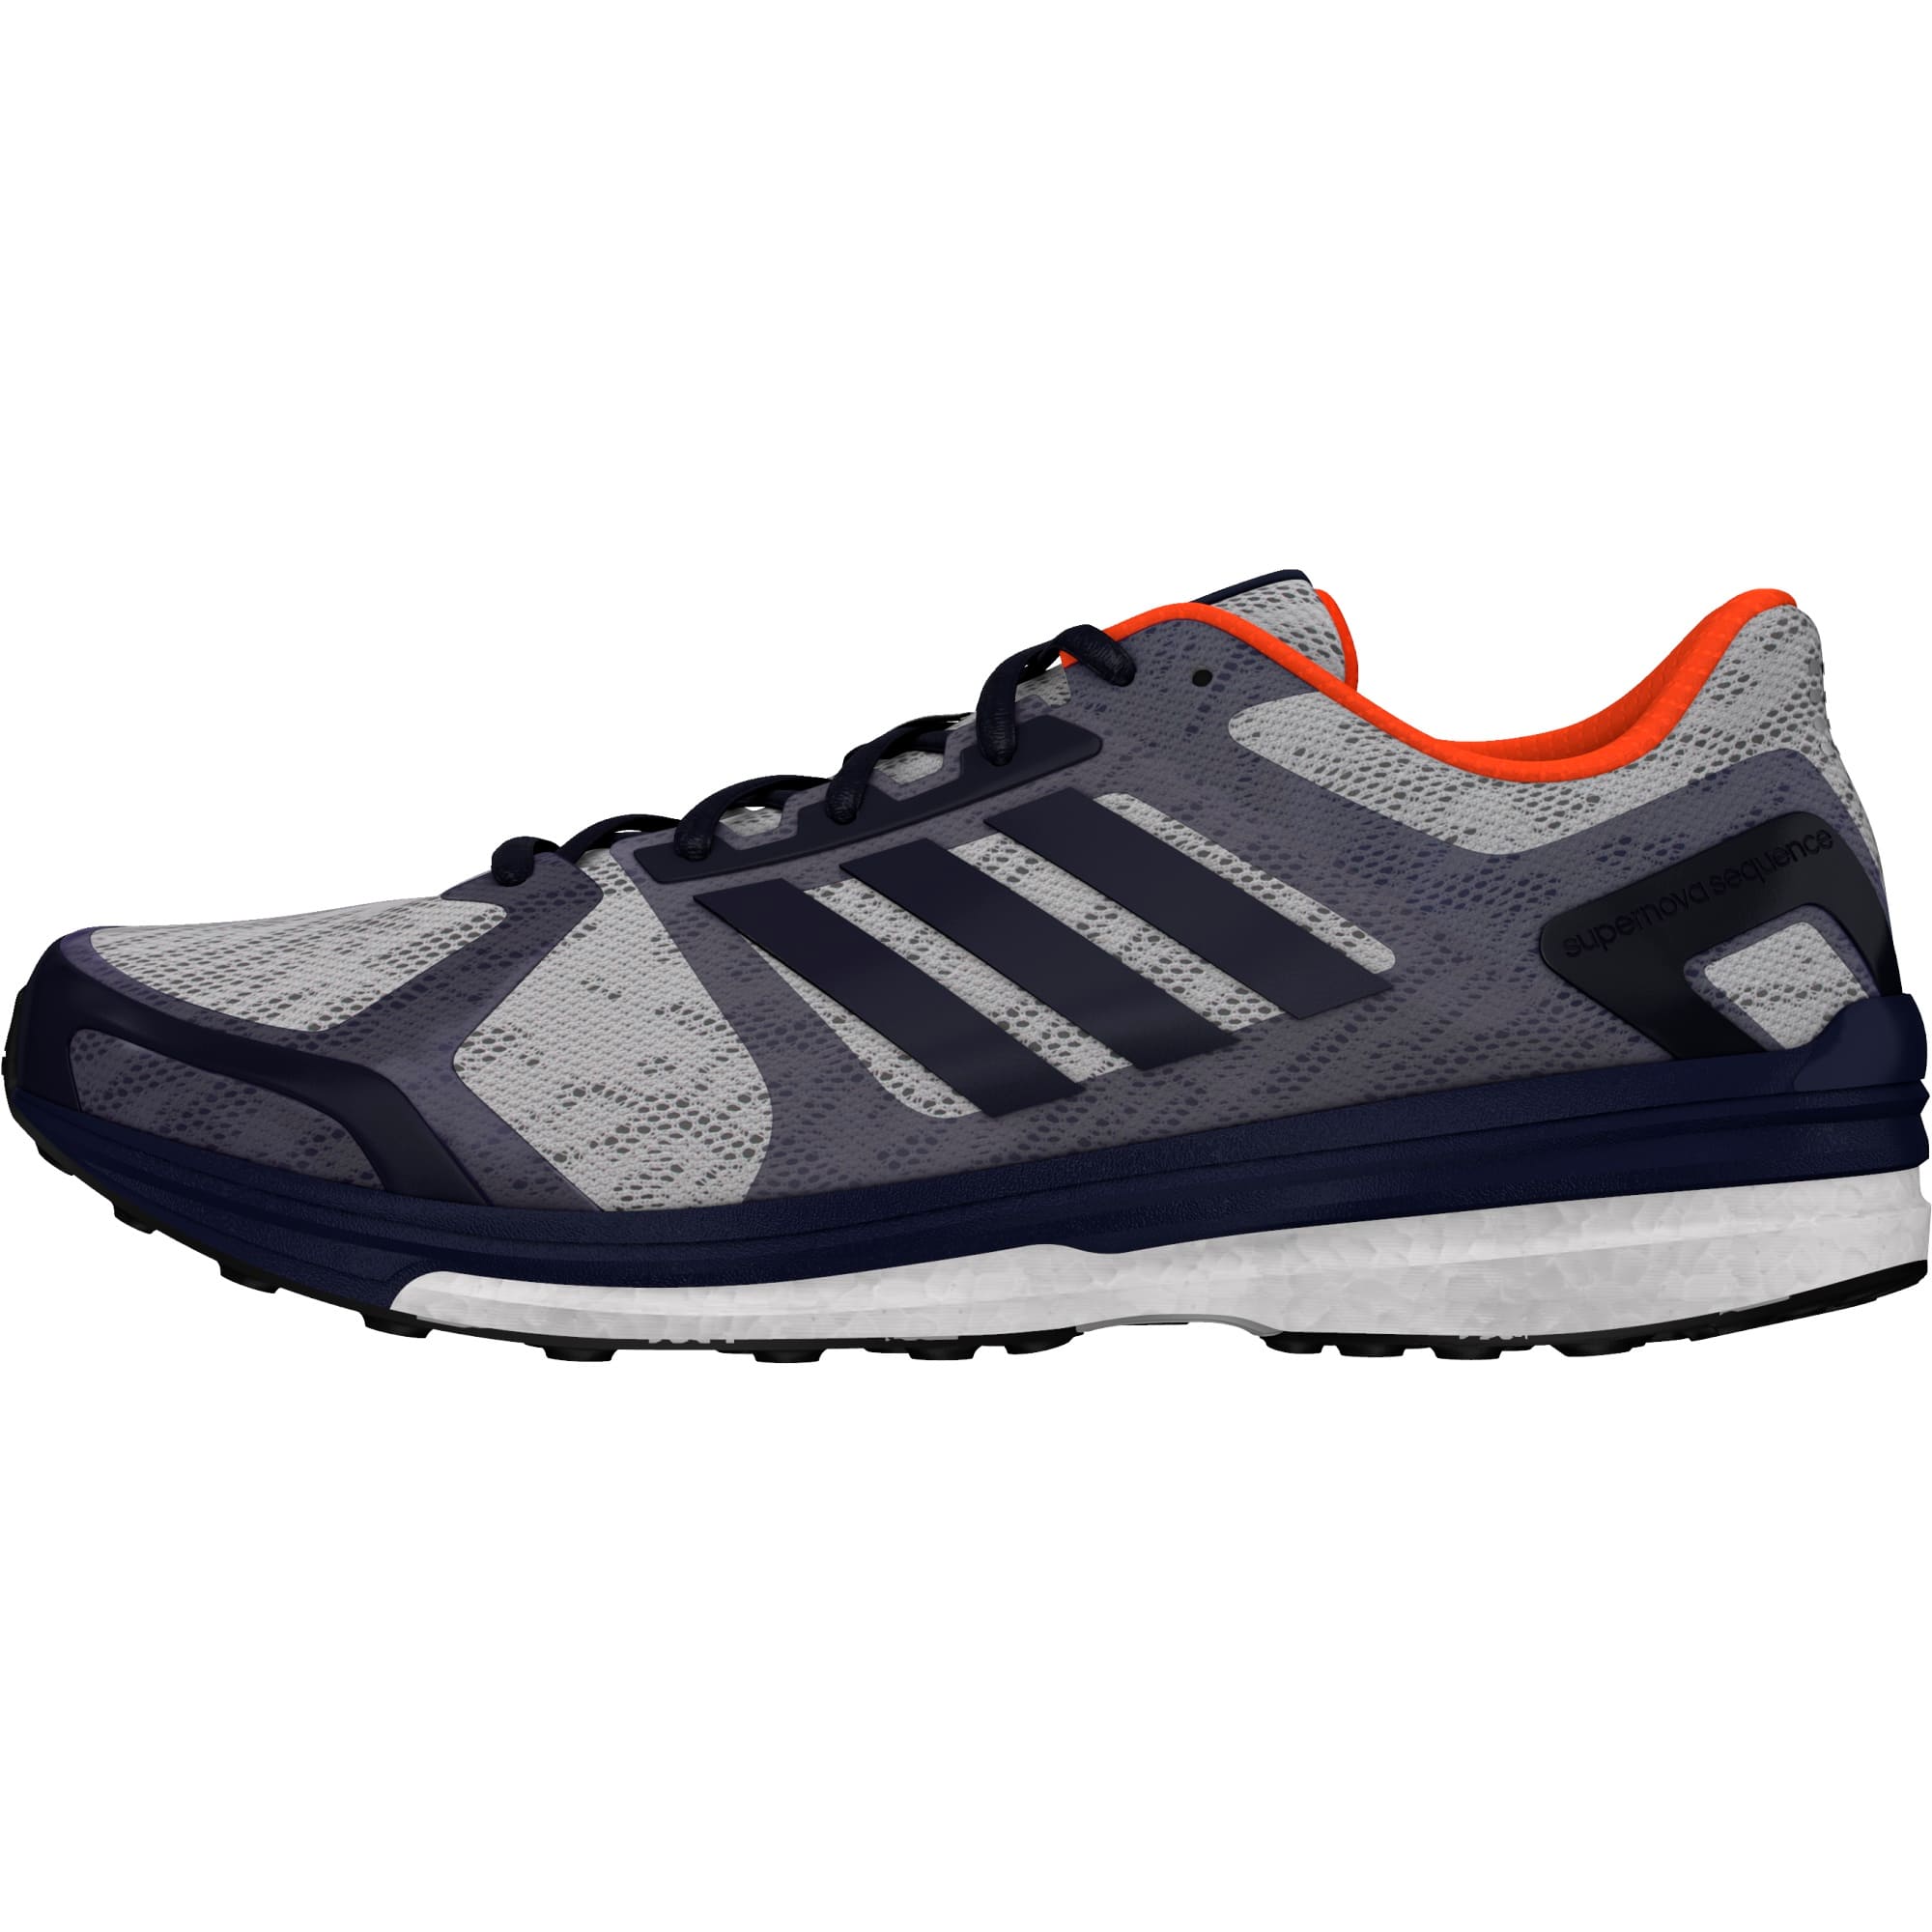 Buy ADIDAS Supernova Sequence 9 M from 